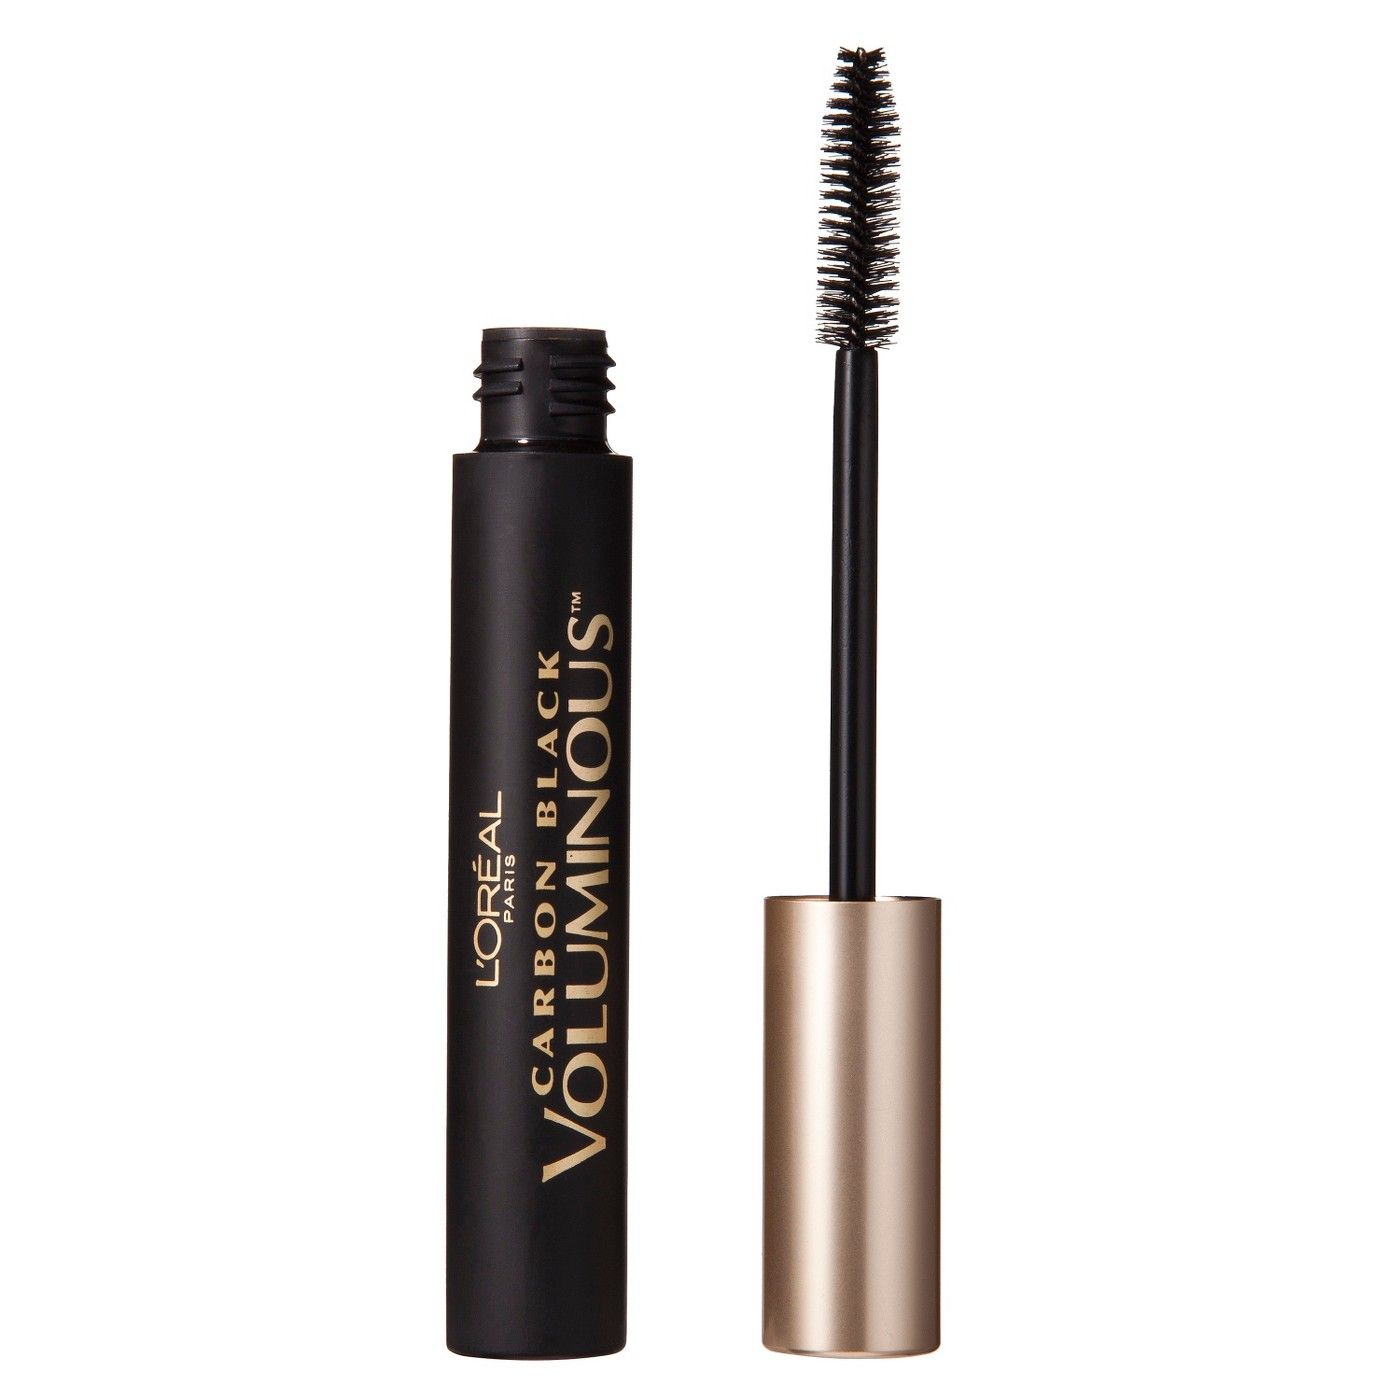 cry-proof mascaras that last through the vows, the first dance, & everything else